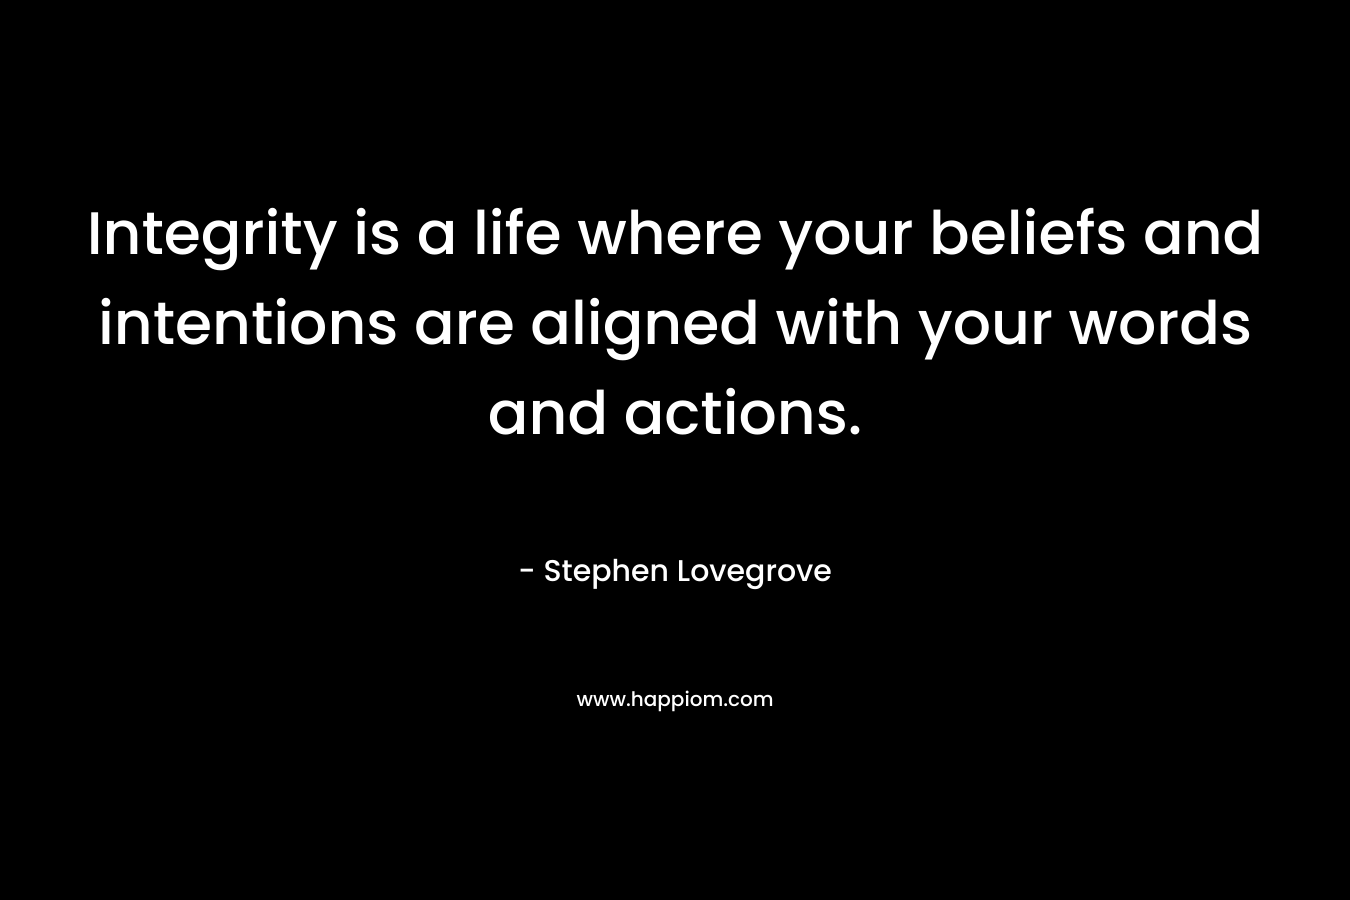 Integrity is a life where your beliefs and intentions are aligned with your words and actions.